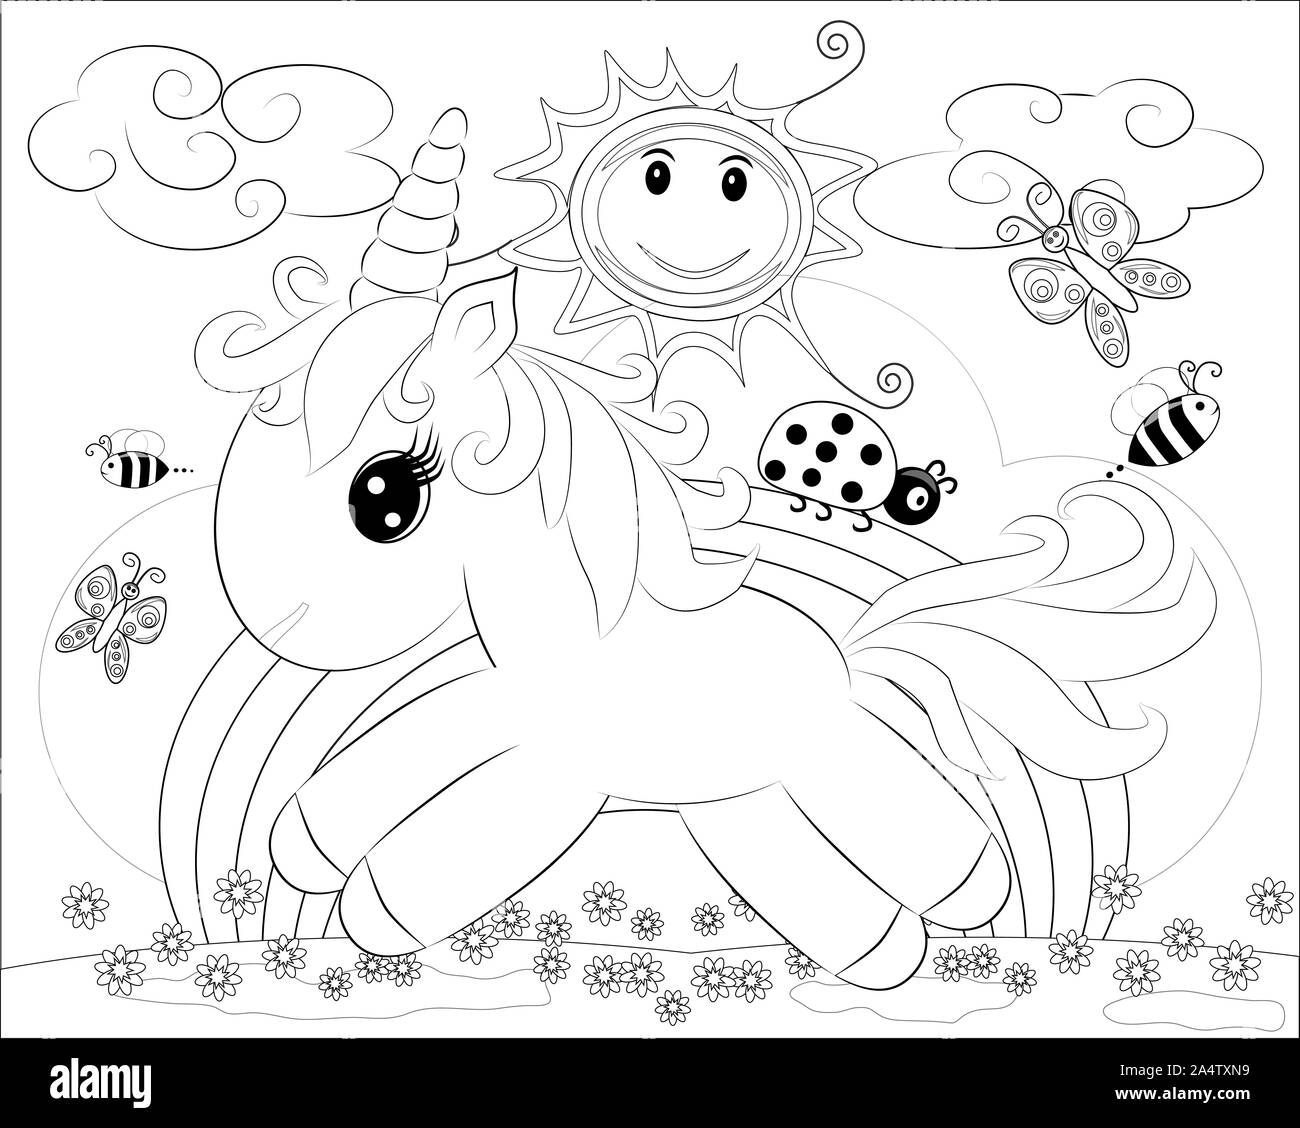 Coloring pages. Little cute pony and rainbow Stock Photo - Alamy